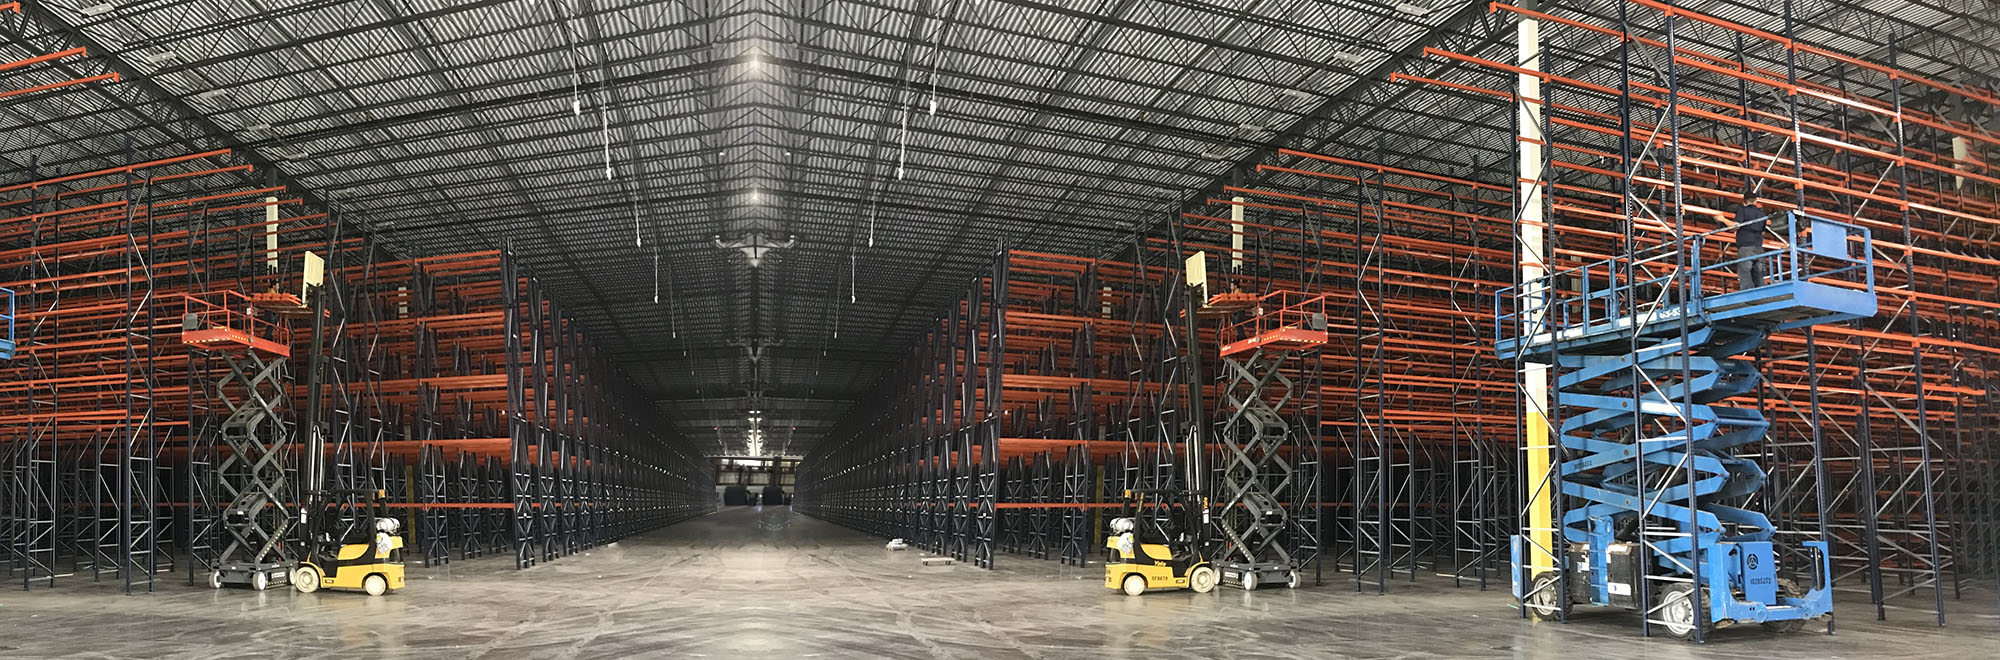 warehouse with racking